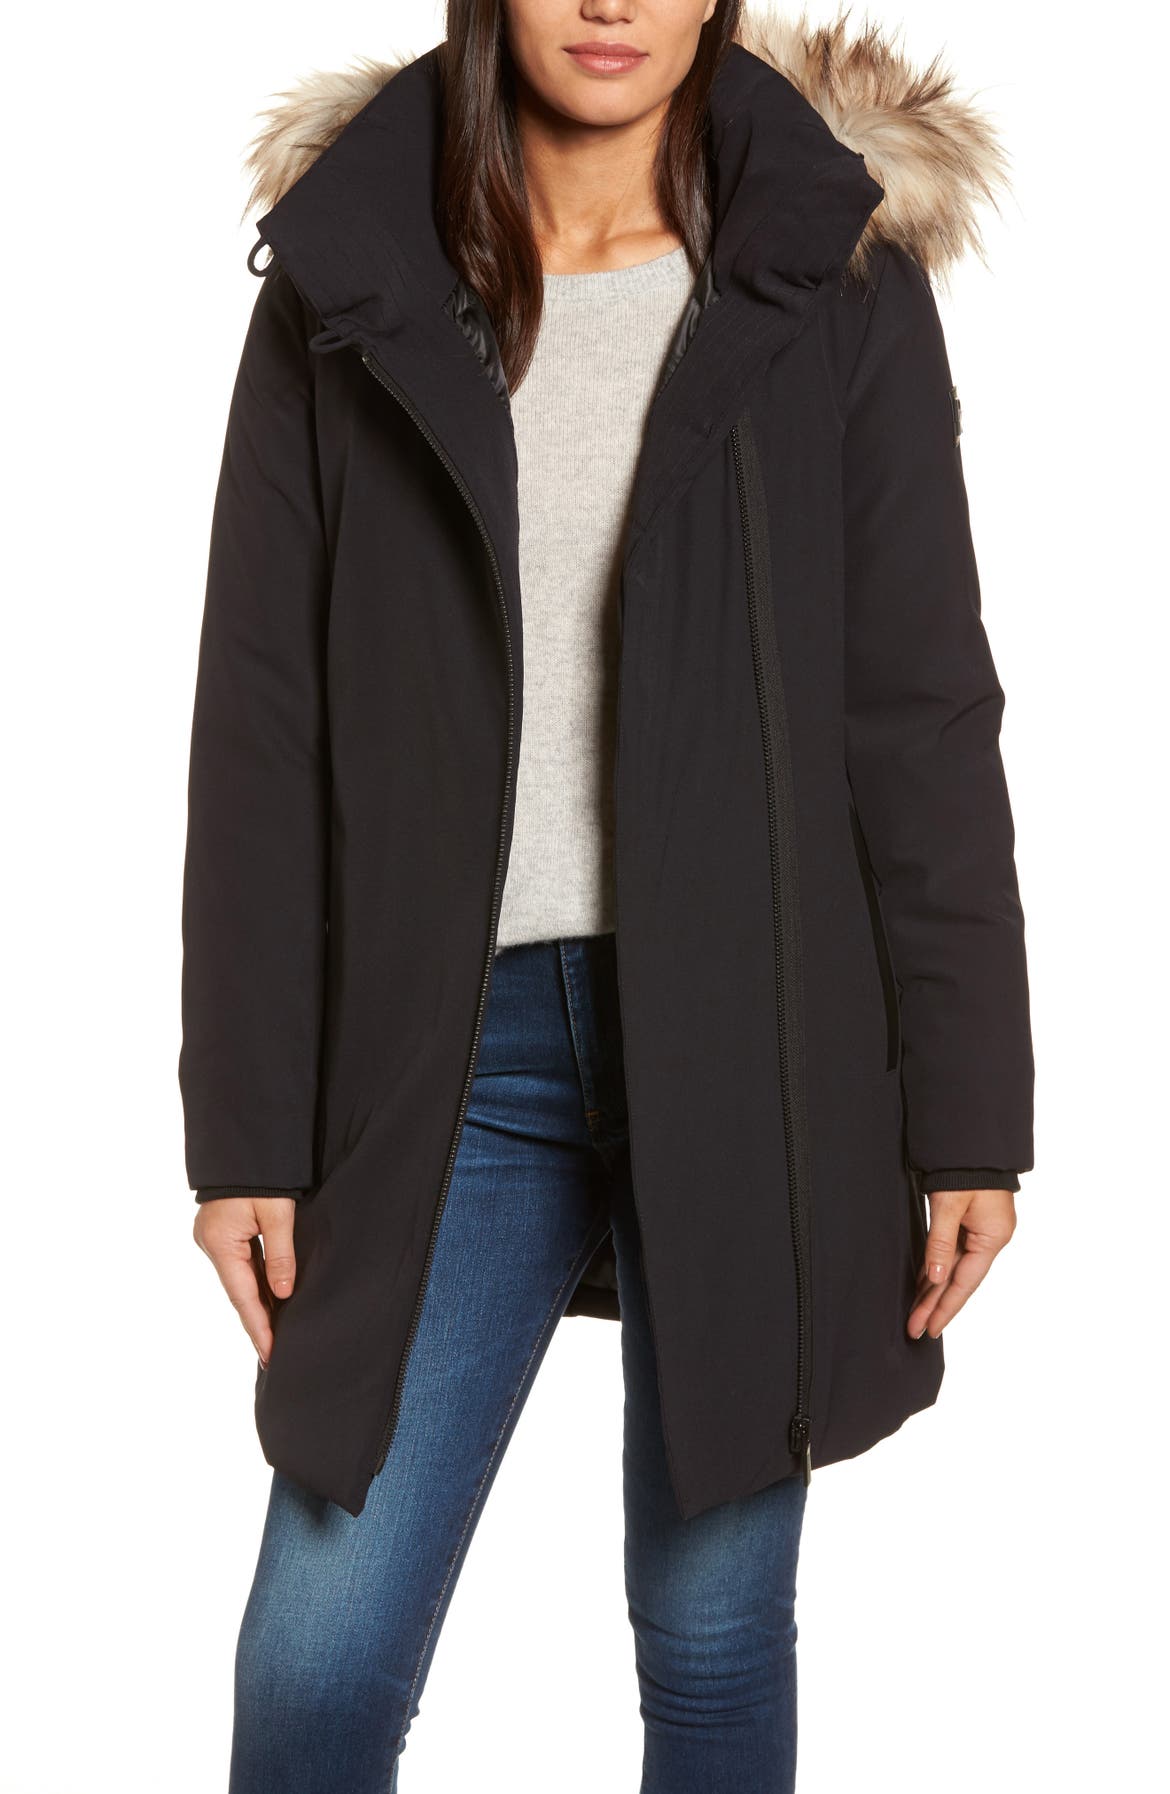 DKNY Hooded Water Resistant Stretch Parka with Faux Fur Trim | Nordstrom